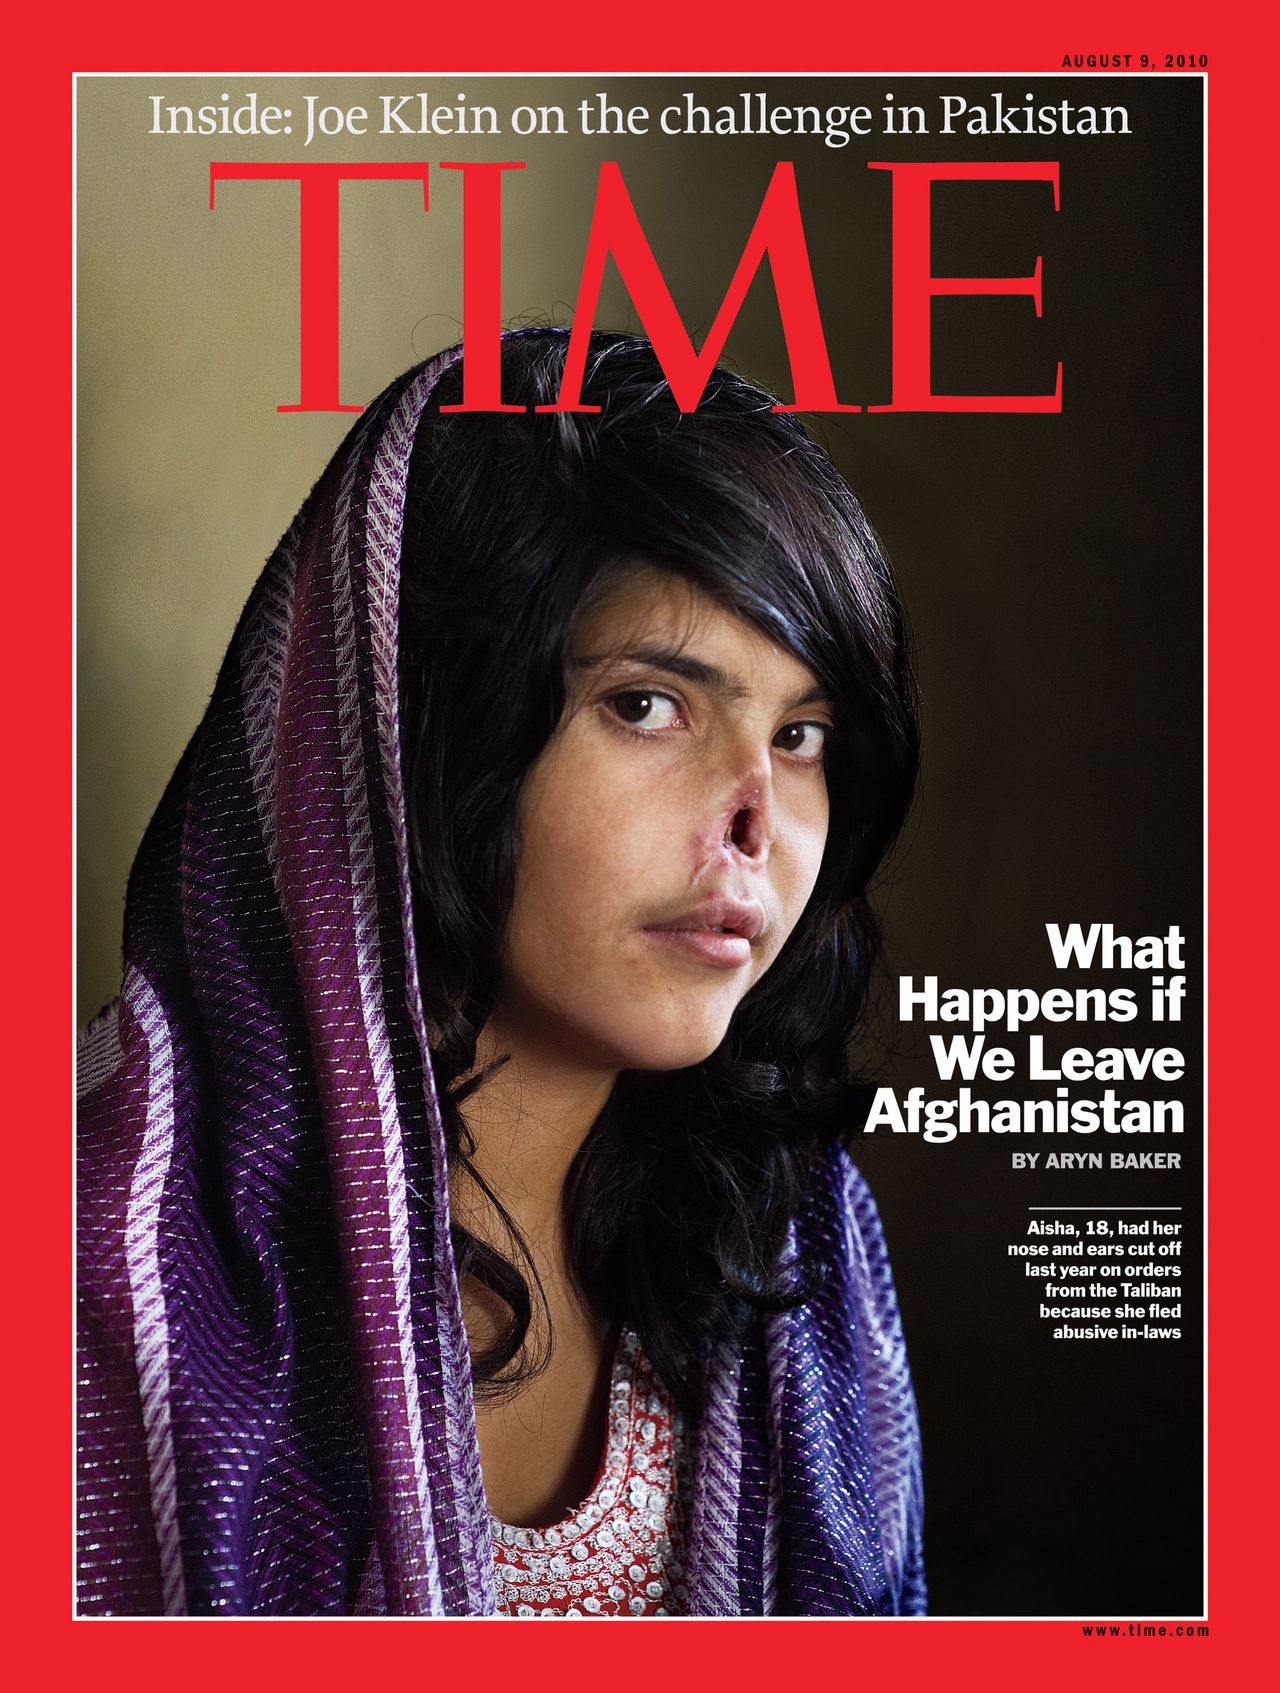 Aisha Bibi op de omslag van Time, dat suggereert dat zij is verminkt door Talibaan. Rechts Aisha Bibi in oktober 2010 met kunstneus. Foto Wire Image This image provided by Time magazine shows the cover of the Aug. 9, 2010 issue, with a photo of Aisha, an 18-year-old Afghan woman. Aisha's nose and ears were cut off in 2009, under orders from a local Taliban commander acting as a judge, as punishment for fleeing her husband's home. (AP Photo/Institute for Time Magaizne, Jodi Bieber) MANDATORY CREDIT: JODI BIEBER - INSTITUTE FOR TIME; NO SALES; MAGAZINES OUT